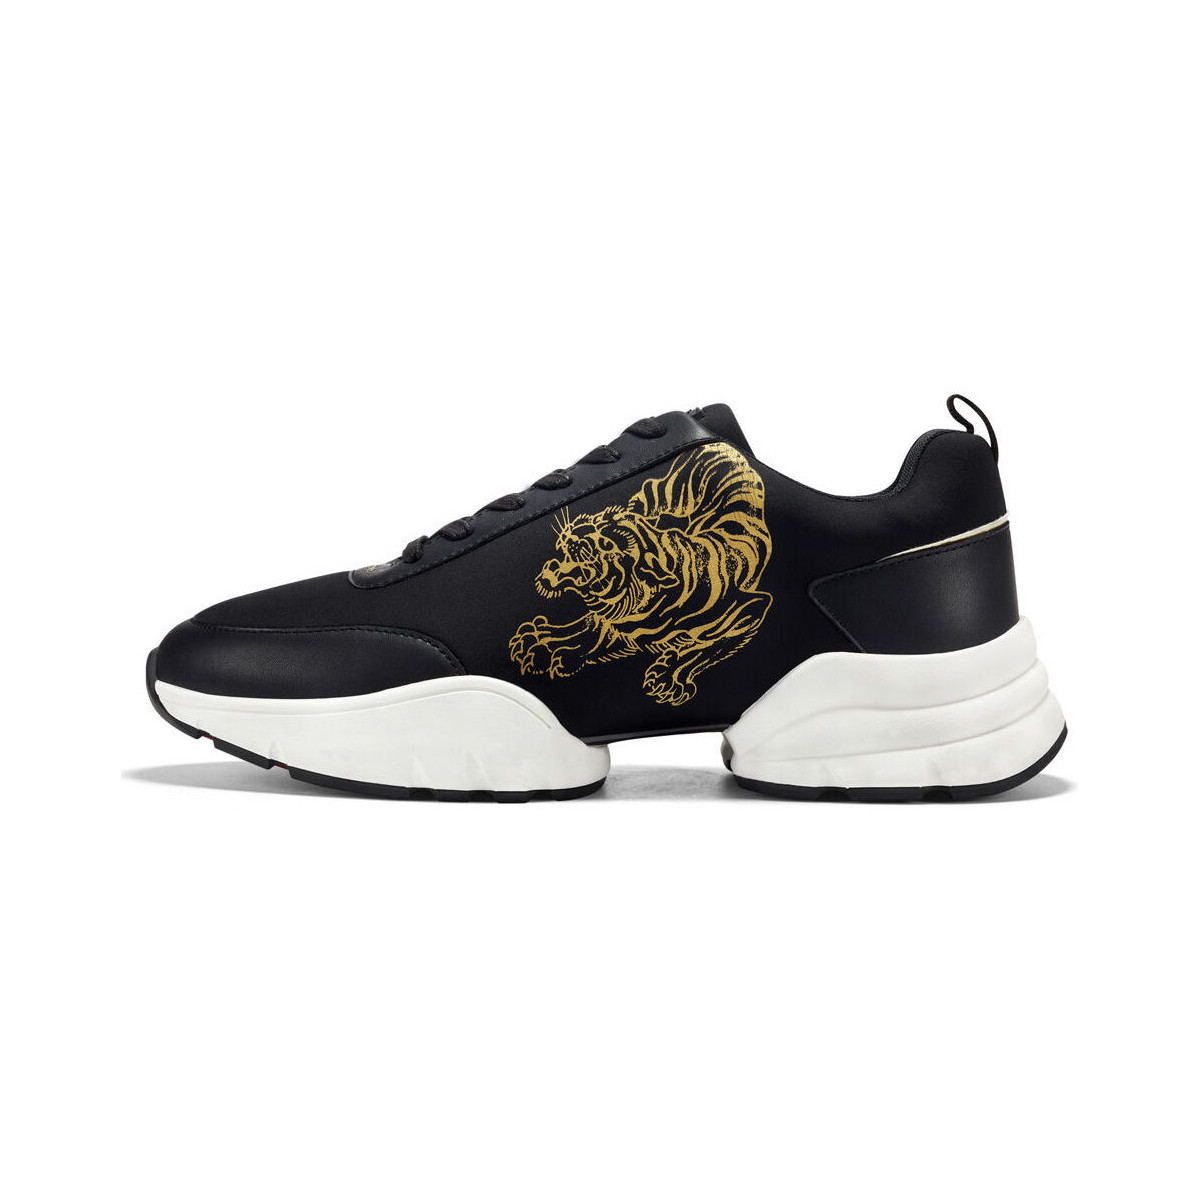 Xαμηλά Sneakers Ed Hardy – Caged runner tiger black-gold